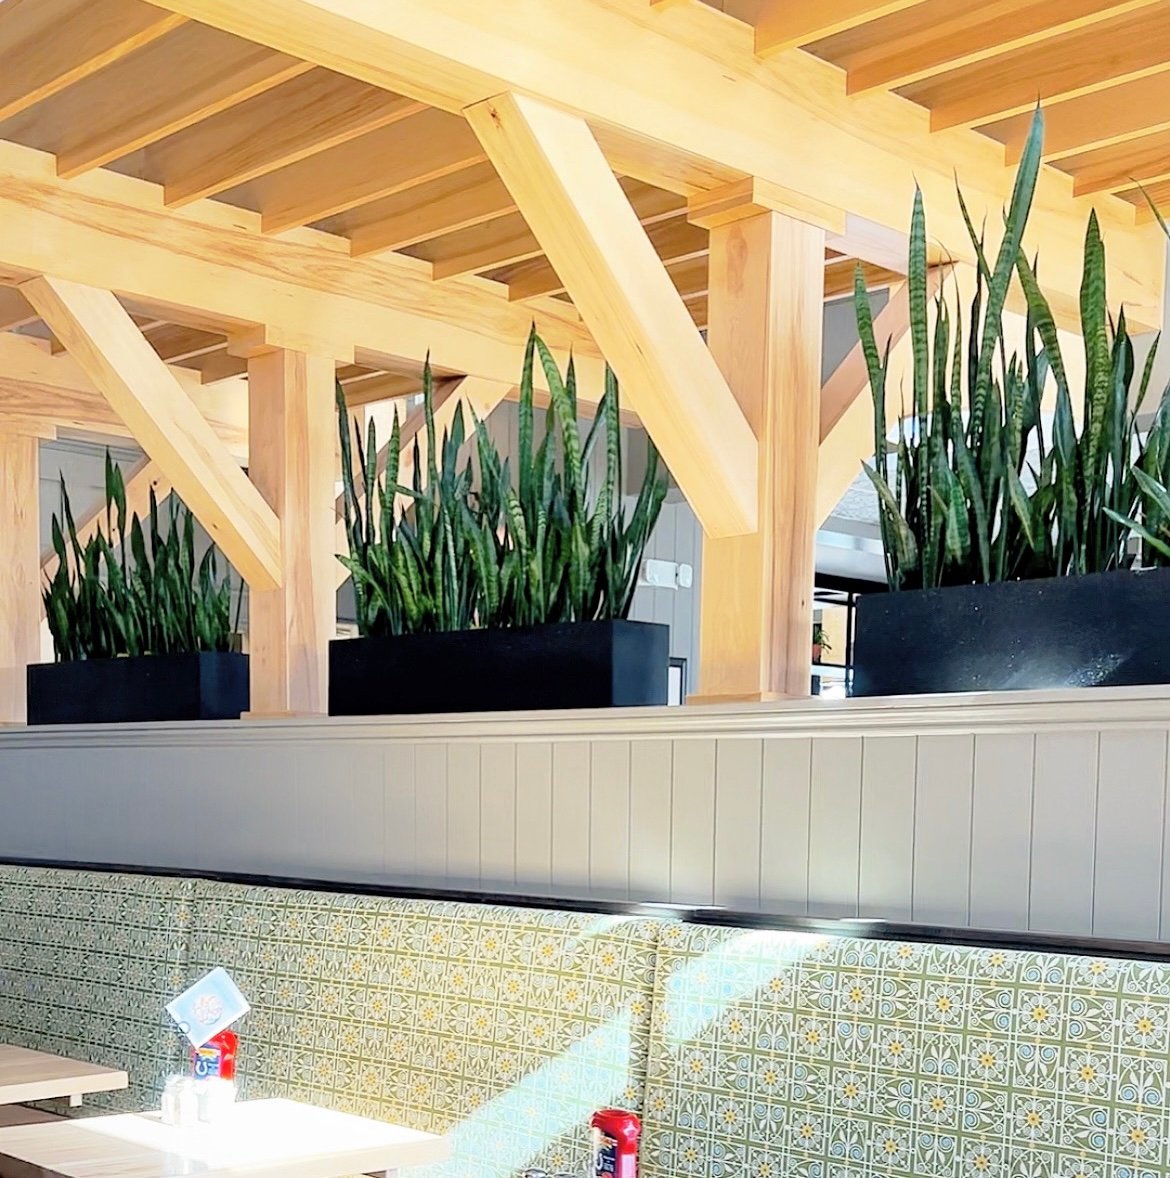 Snake Plants in planters above restaurant booths at Rosie's Cafe